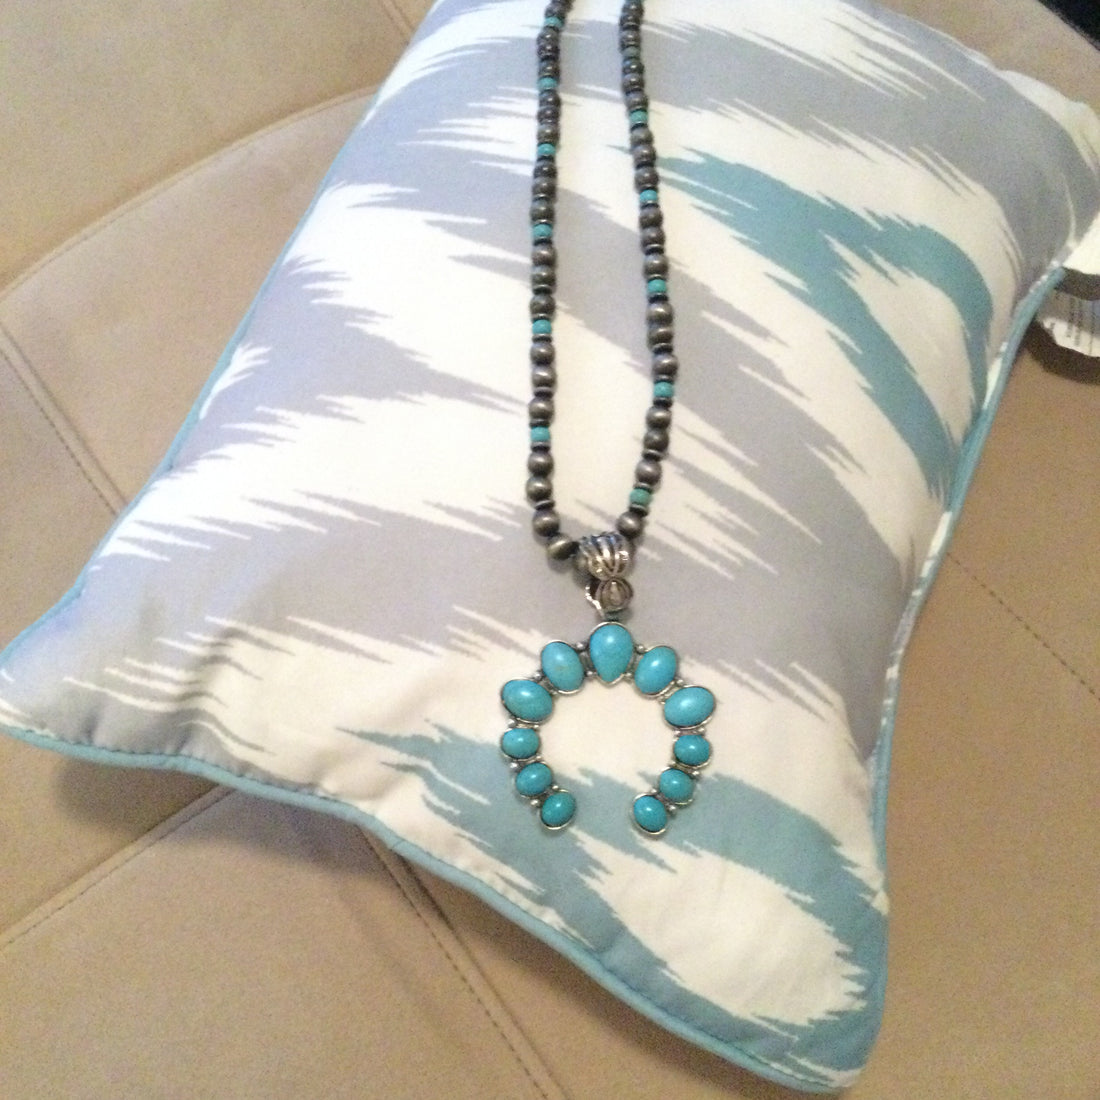 Another Top View-Beaded turquoise Crescent Pendant Necklace